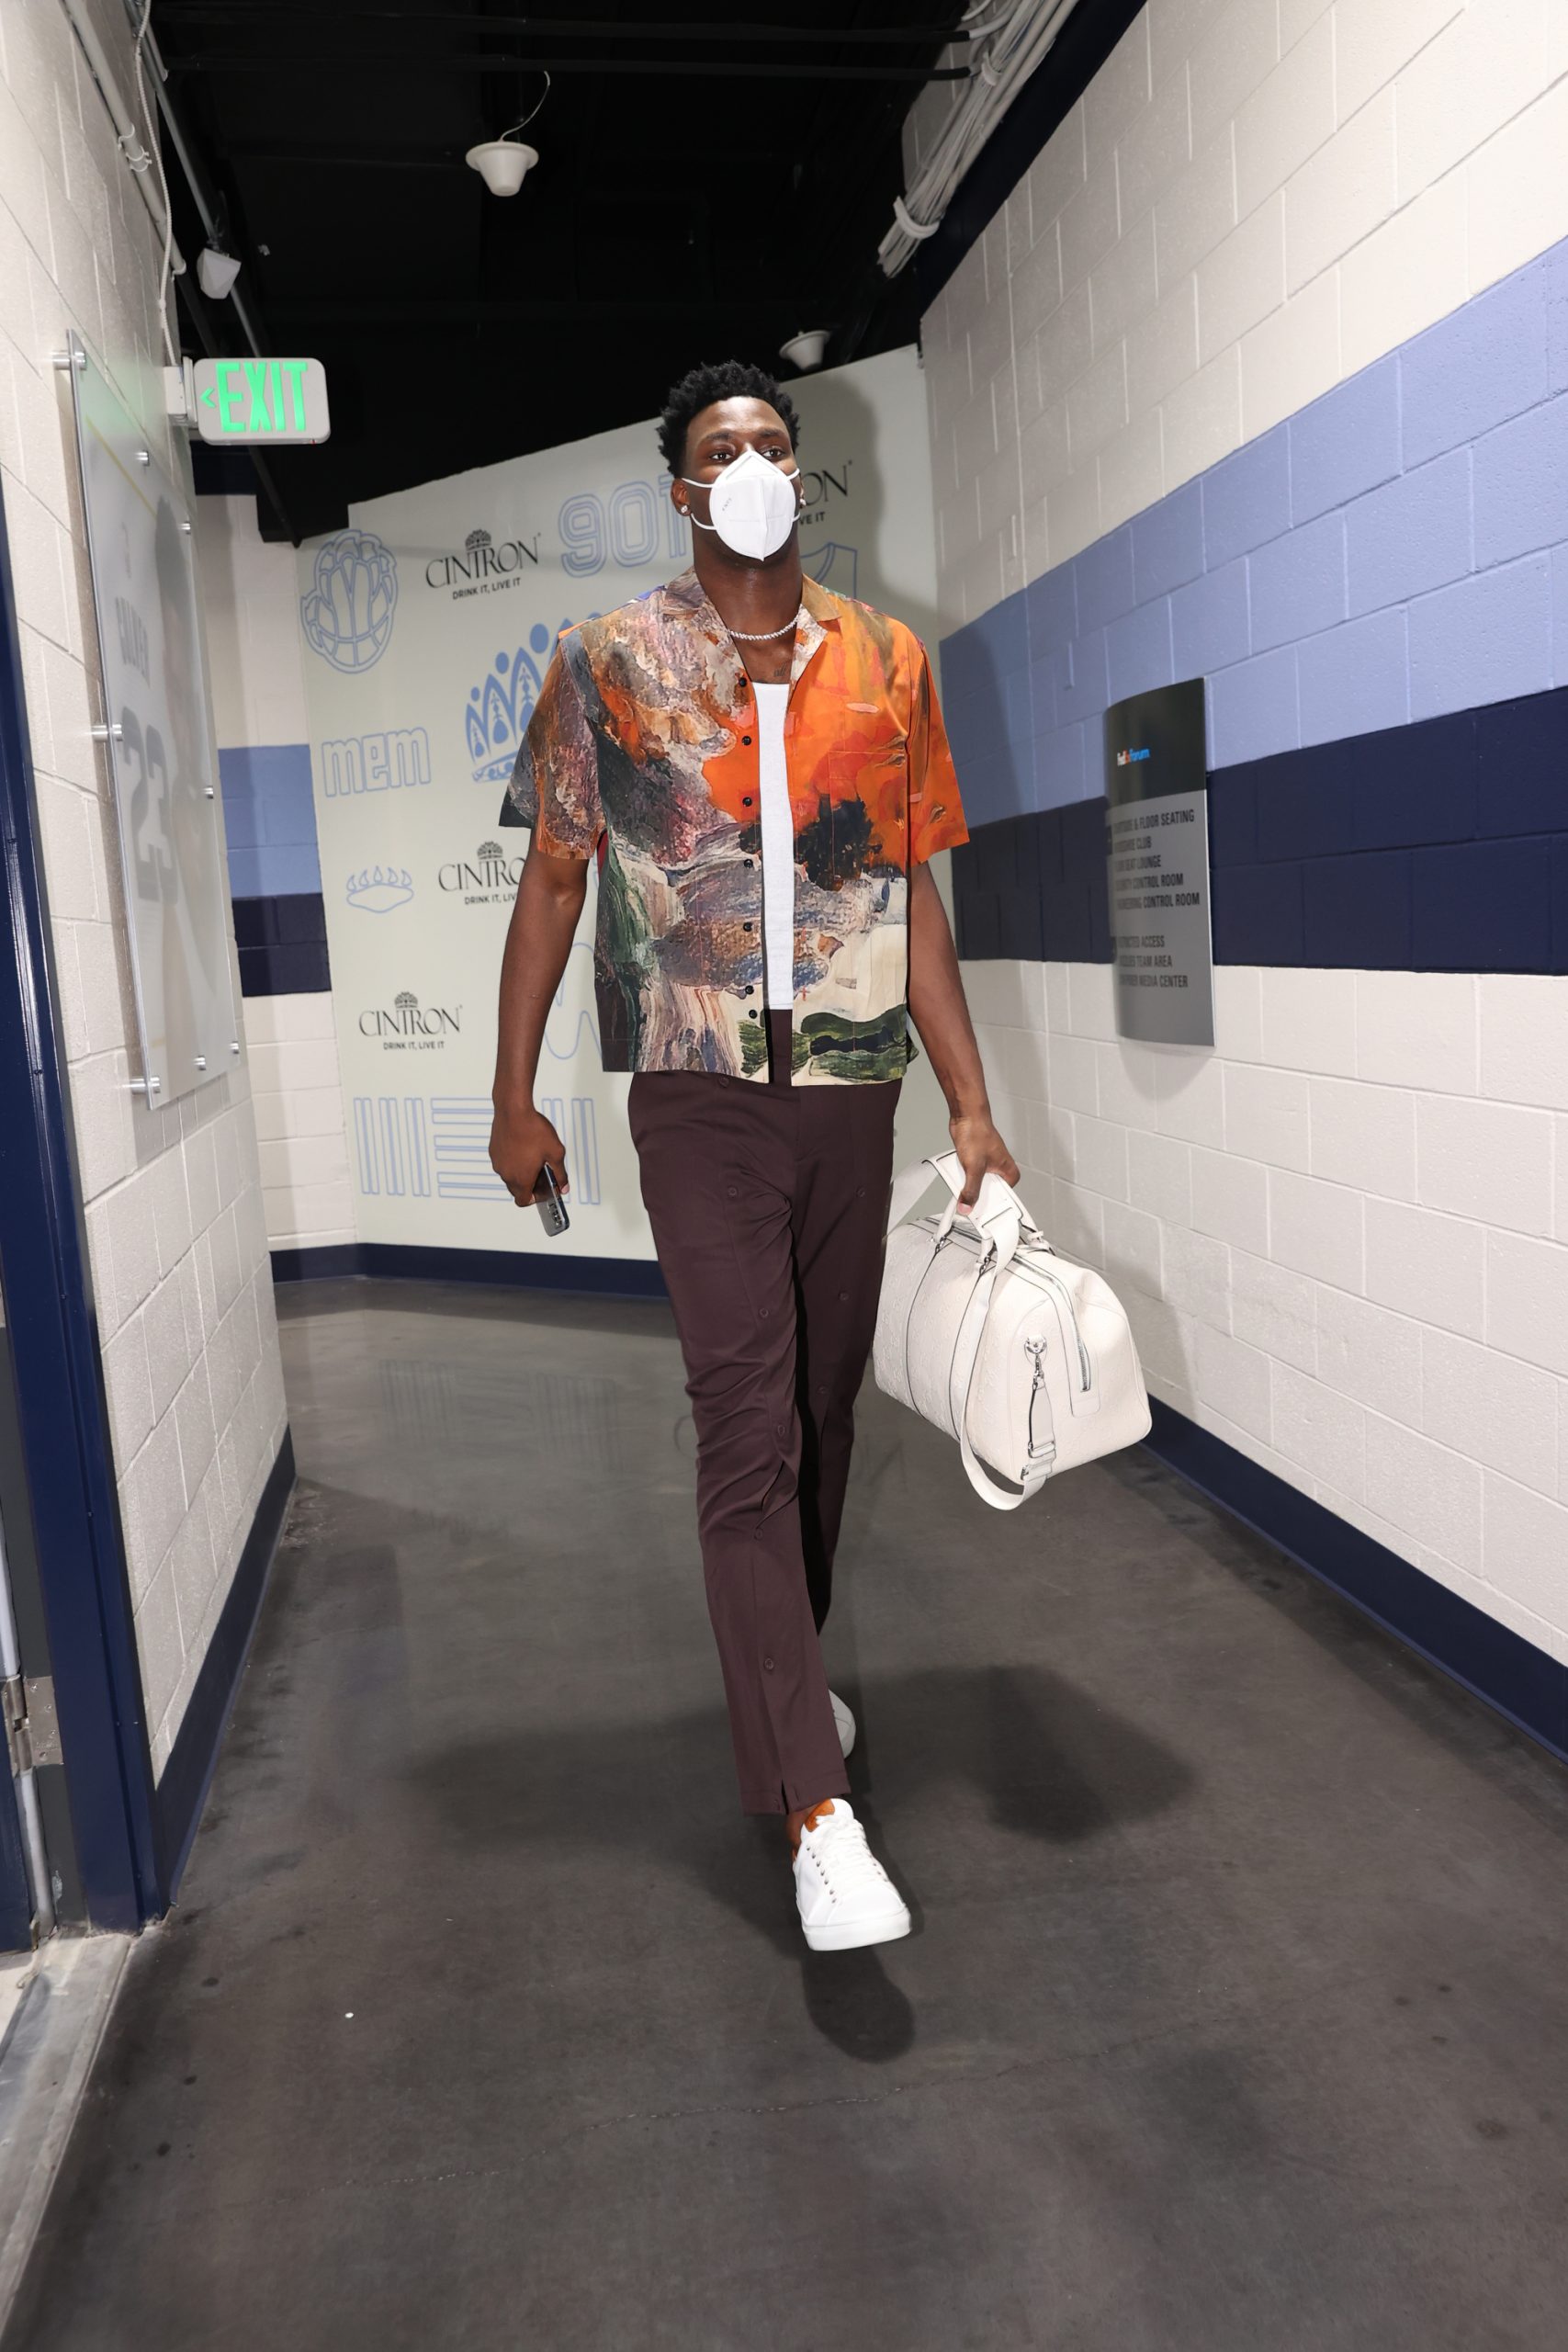 Jaren Jackson Jr's Bold Fashion Style is Making a Statement in Memphis